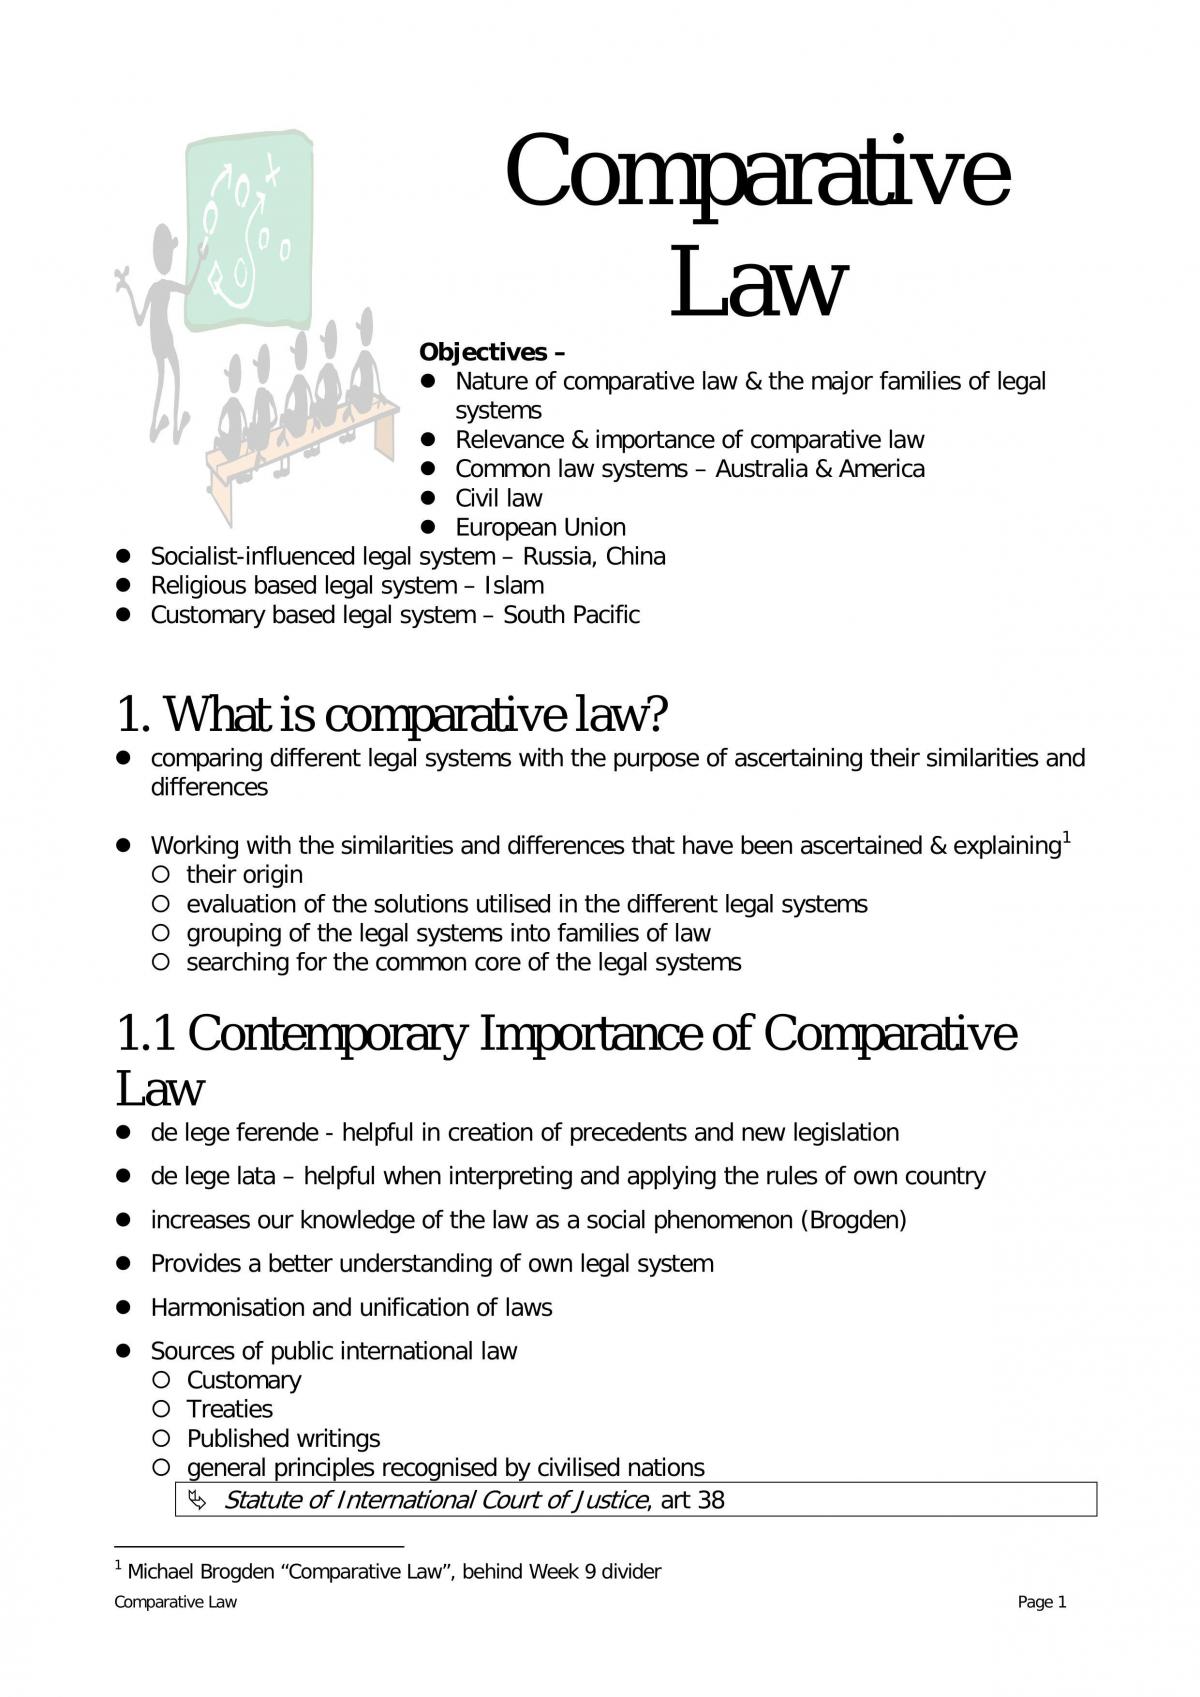 Comparative Law - Page 1